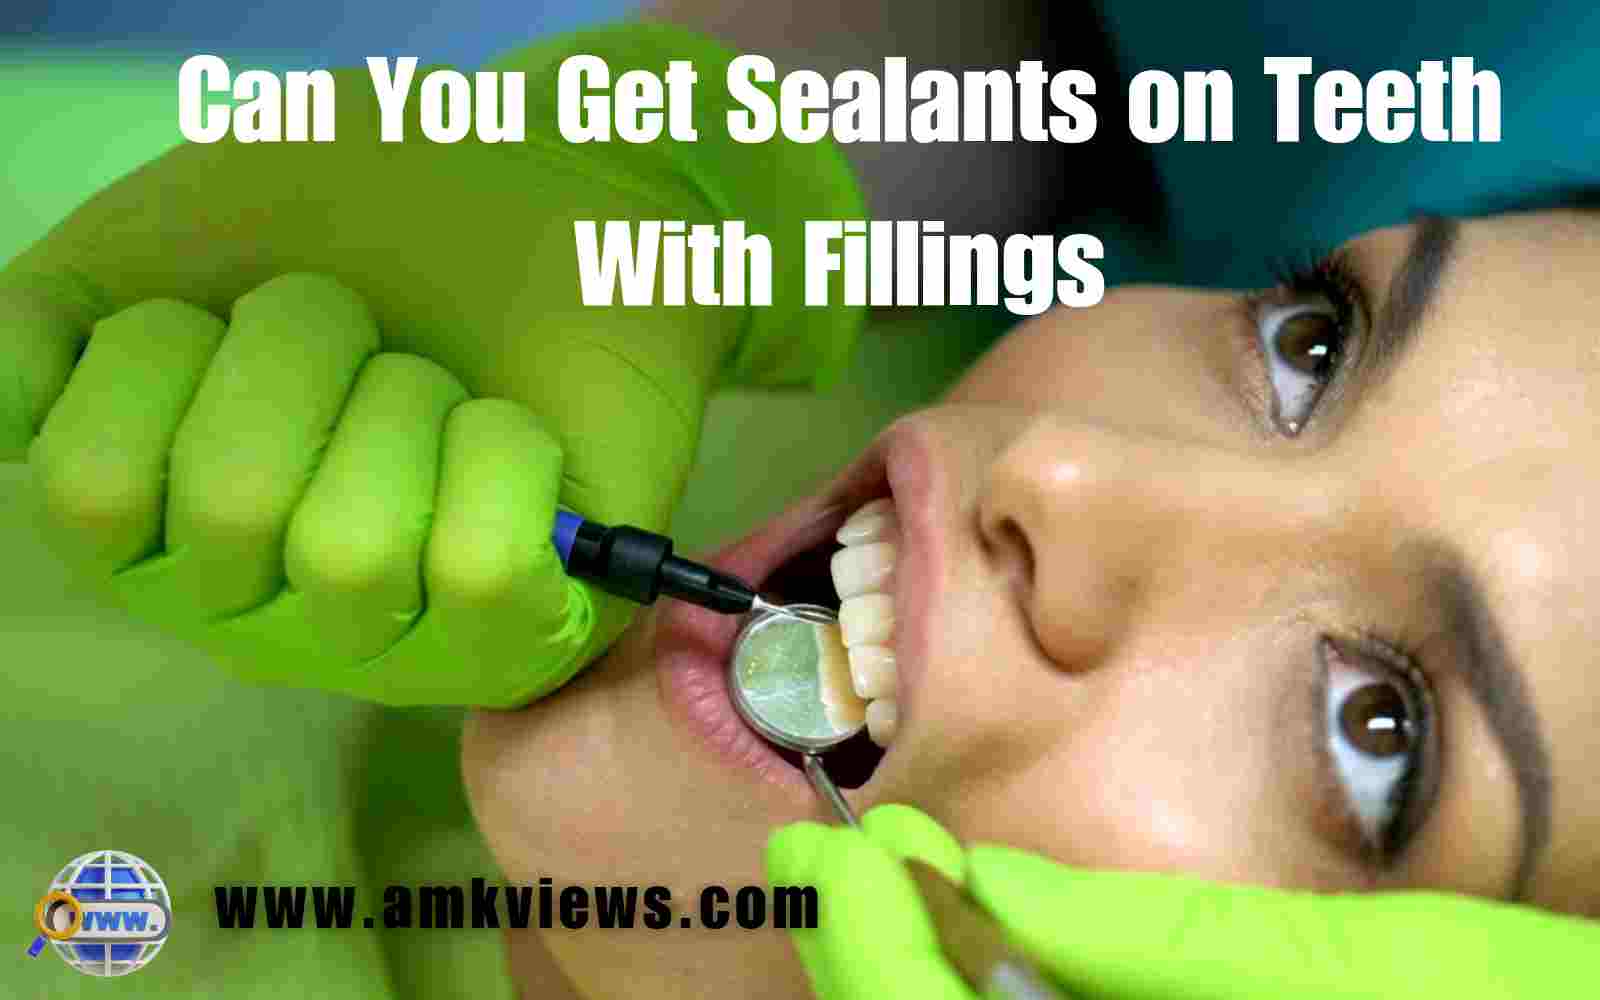 Can You Get Sealants on Teeth With Fillings